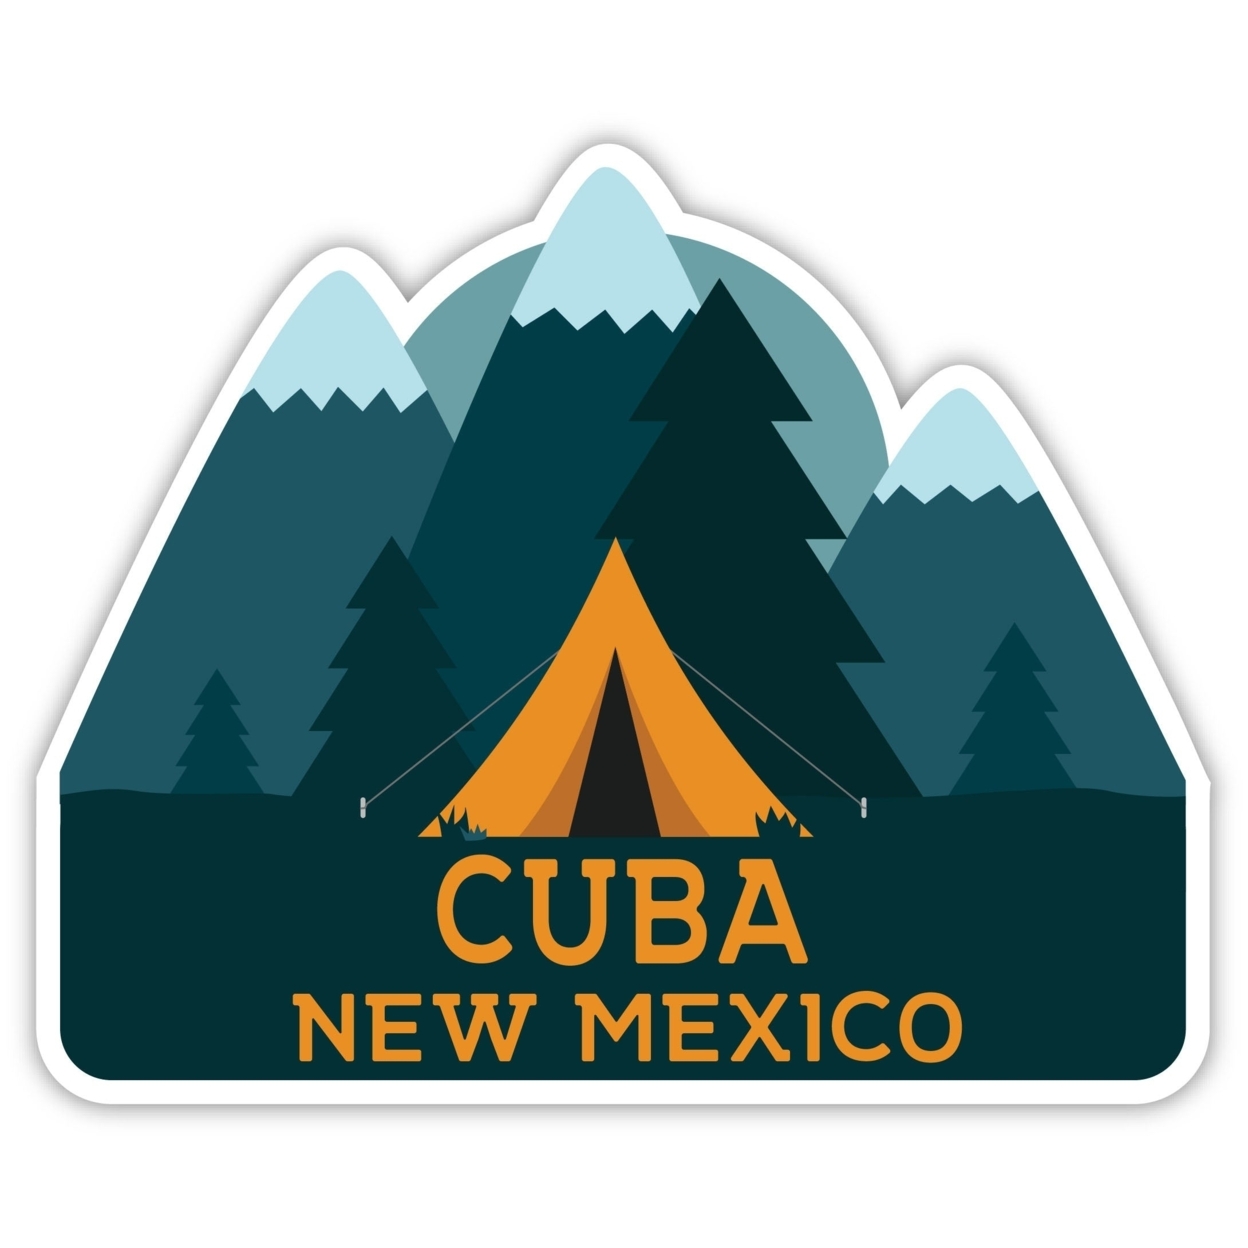 Cuba New Mexico Souvenir Decorative Stickers (Choose Theme And Size) - 4-Pack, 2-Inch, Tent